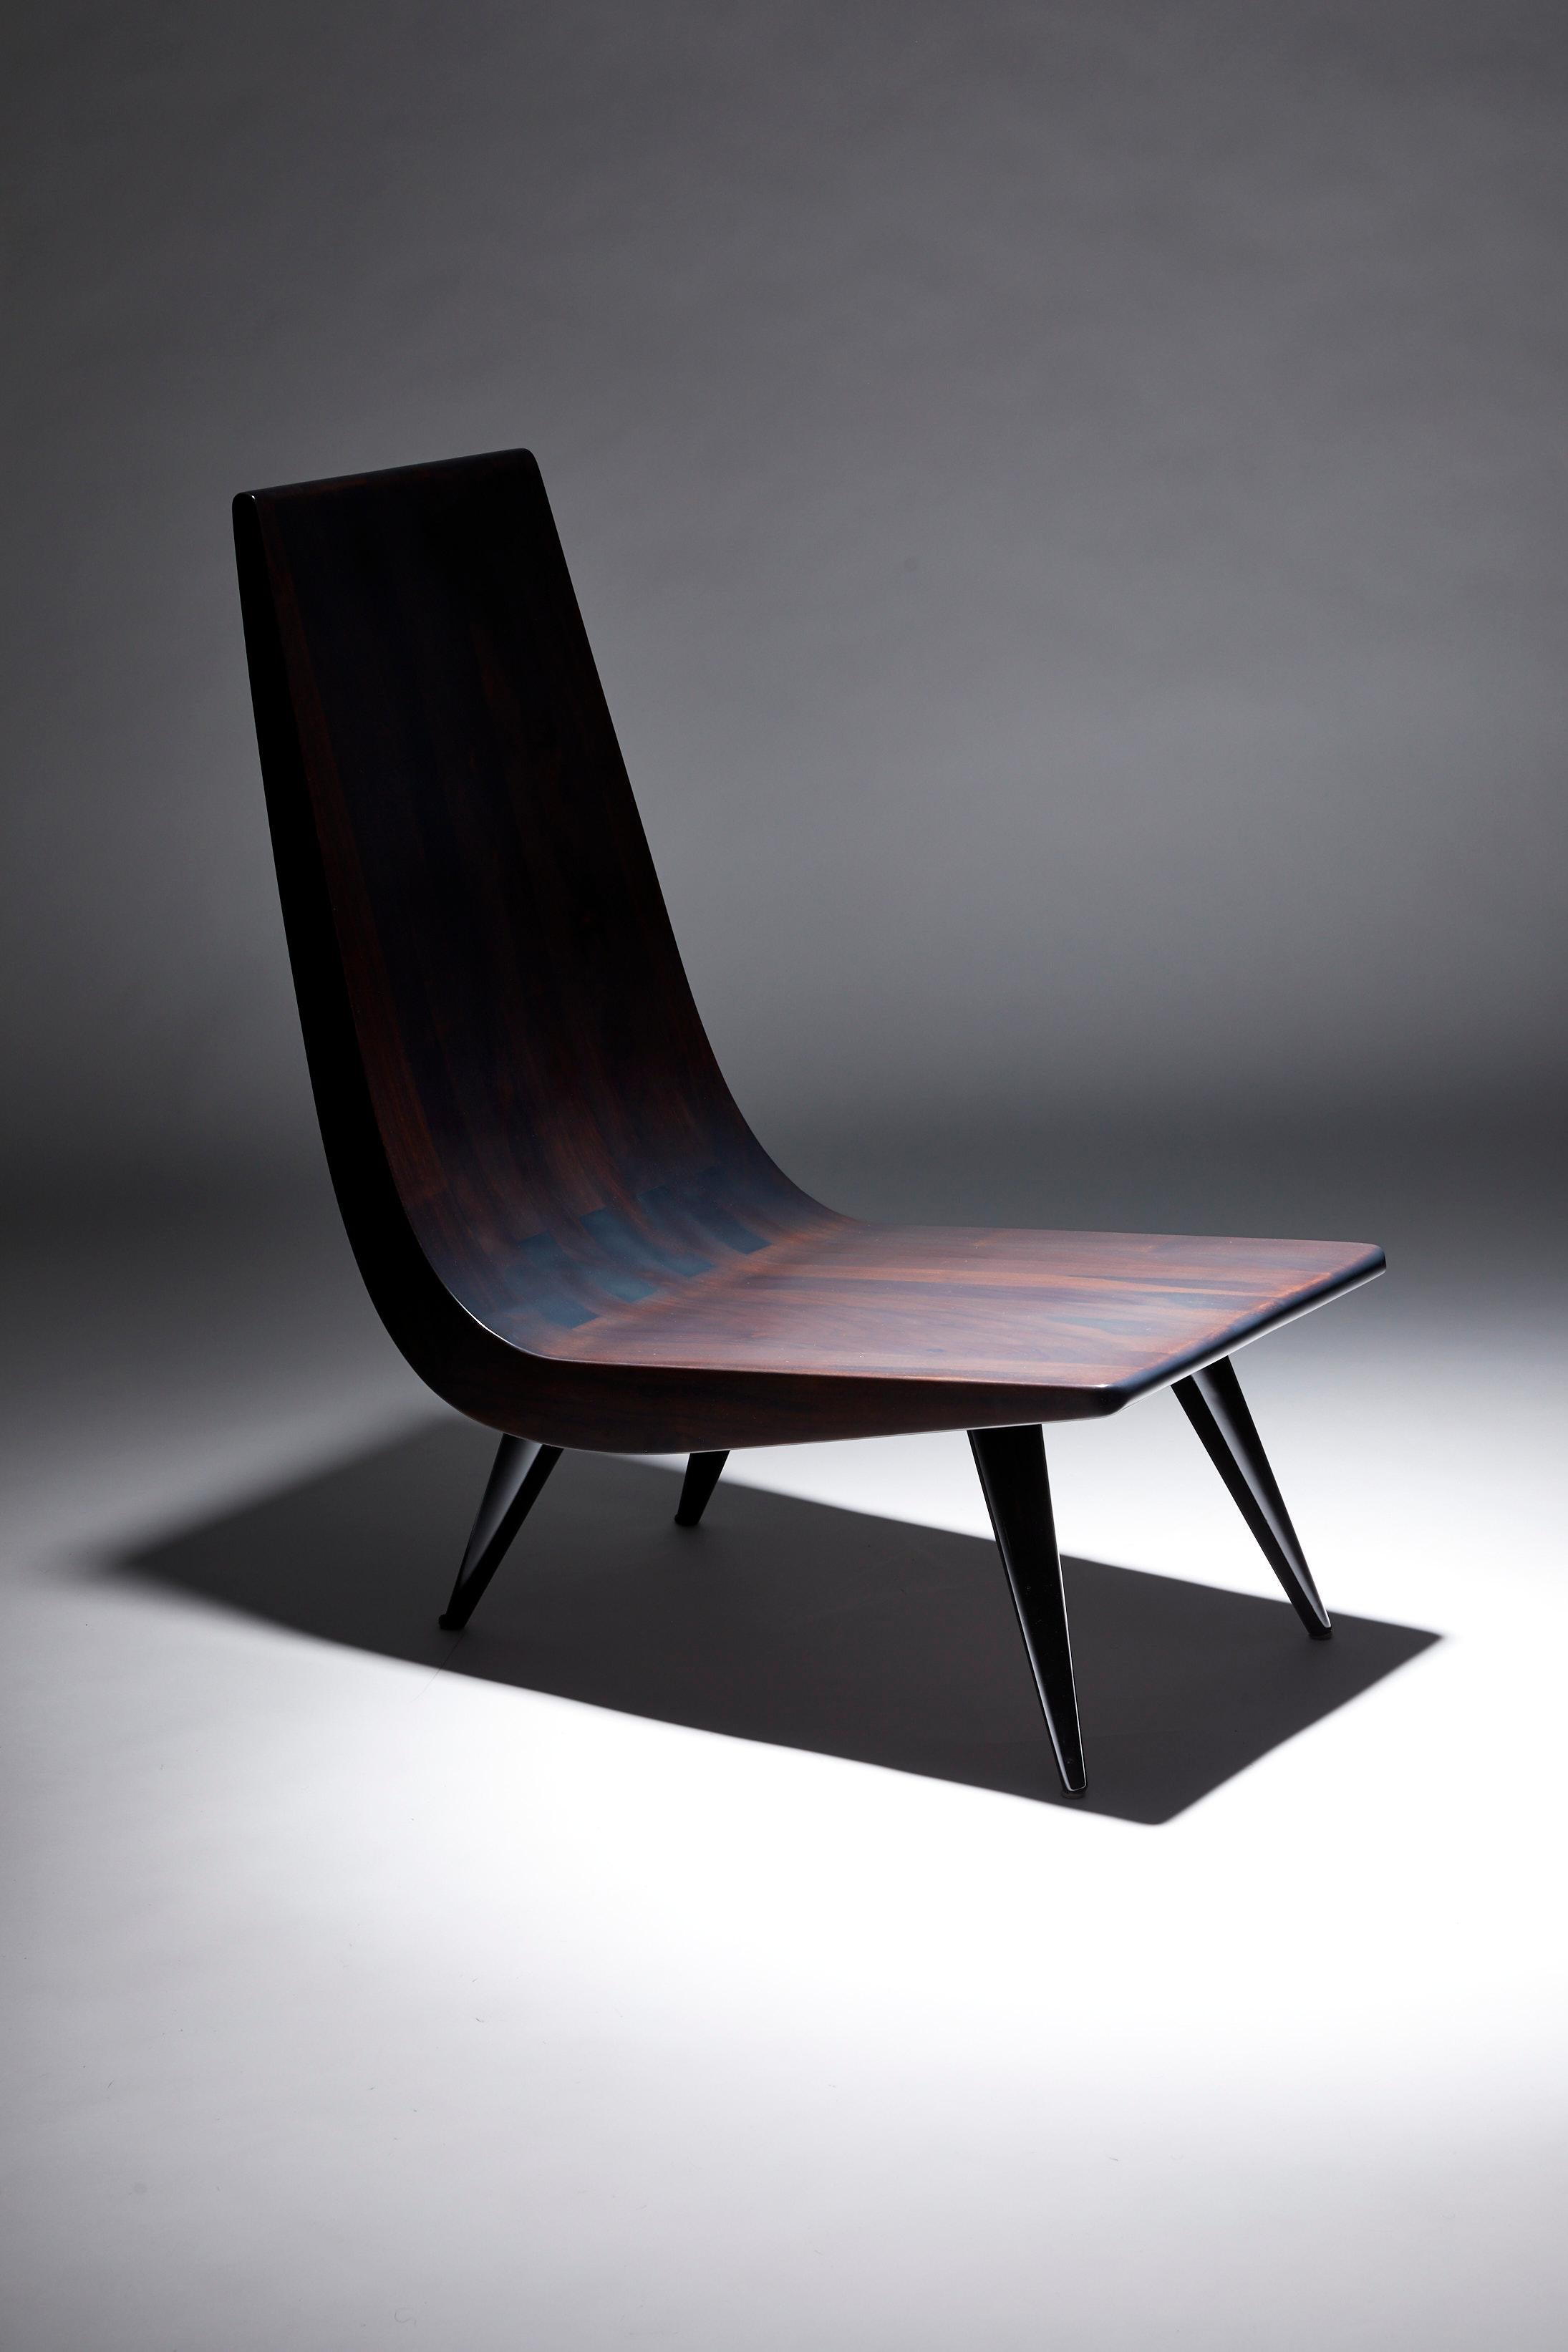 Lounge chair, JAH, by Reda Amalou, 2019, Walnut and Steel legs  2